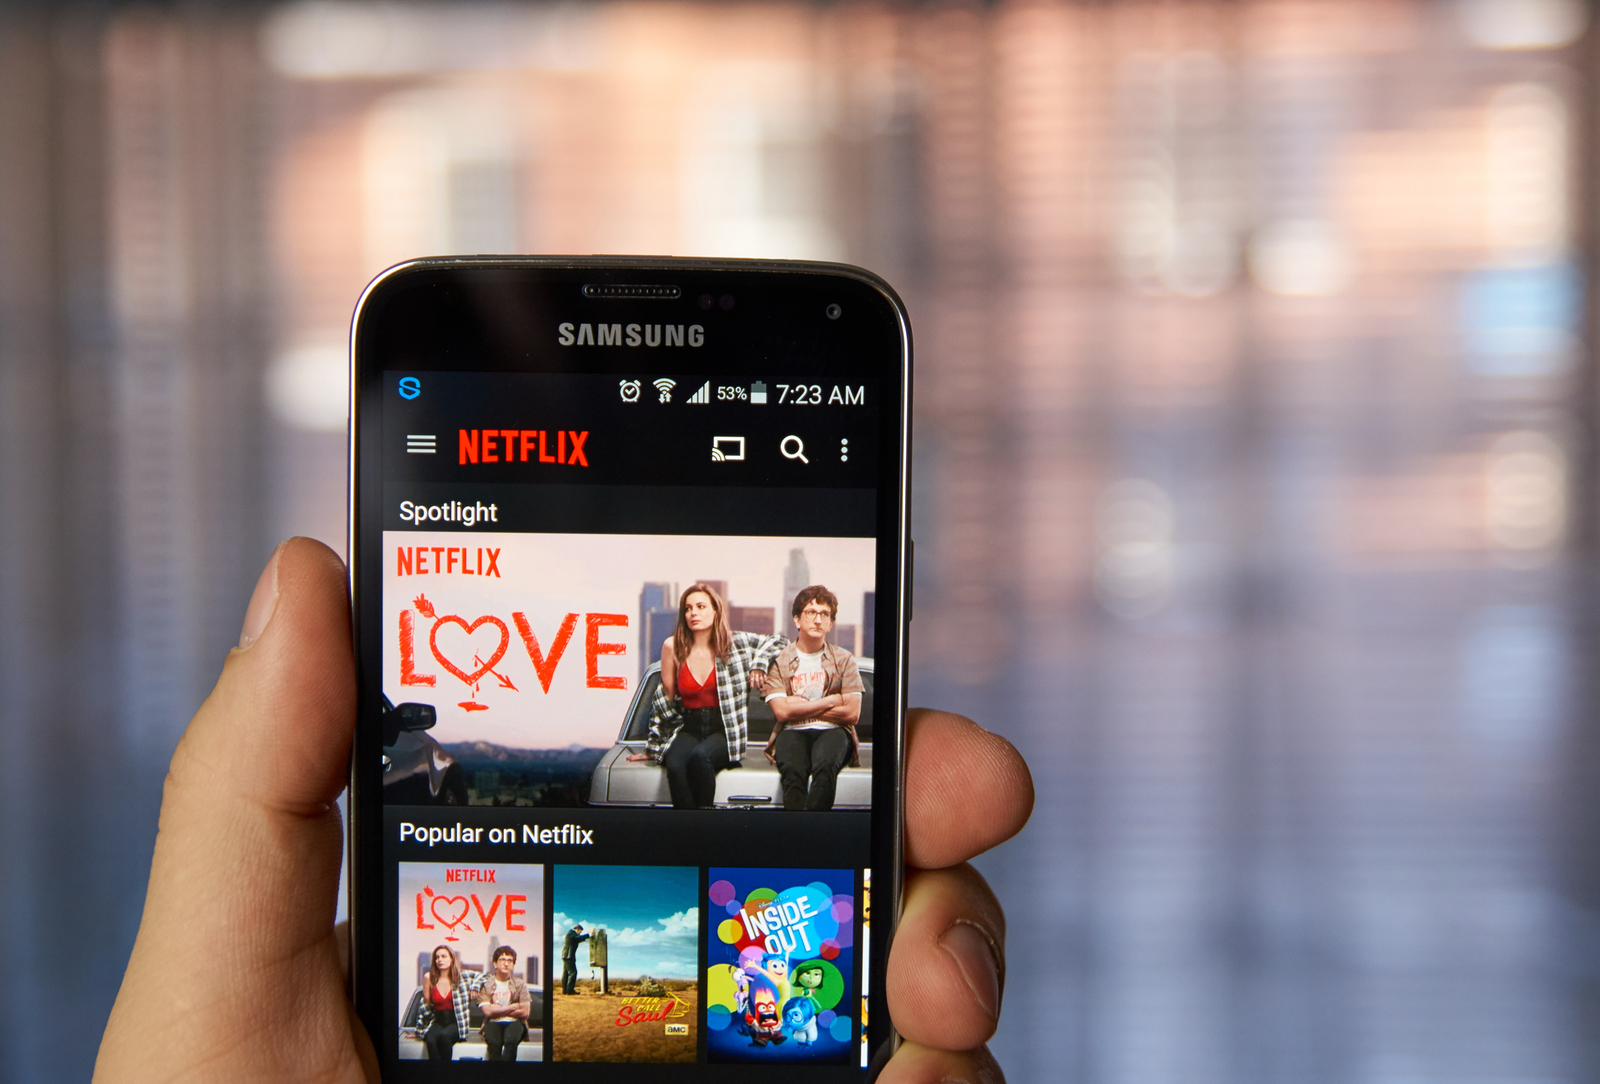 How Netflix Viewers Respond to Images (And How To Apply It To Your Social Media Posts)